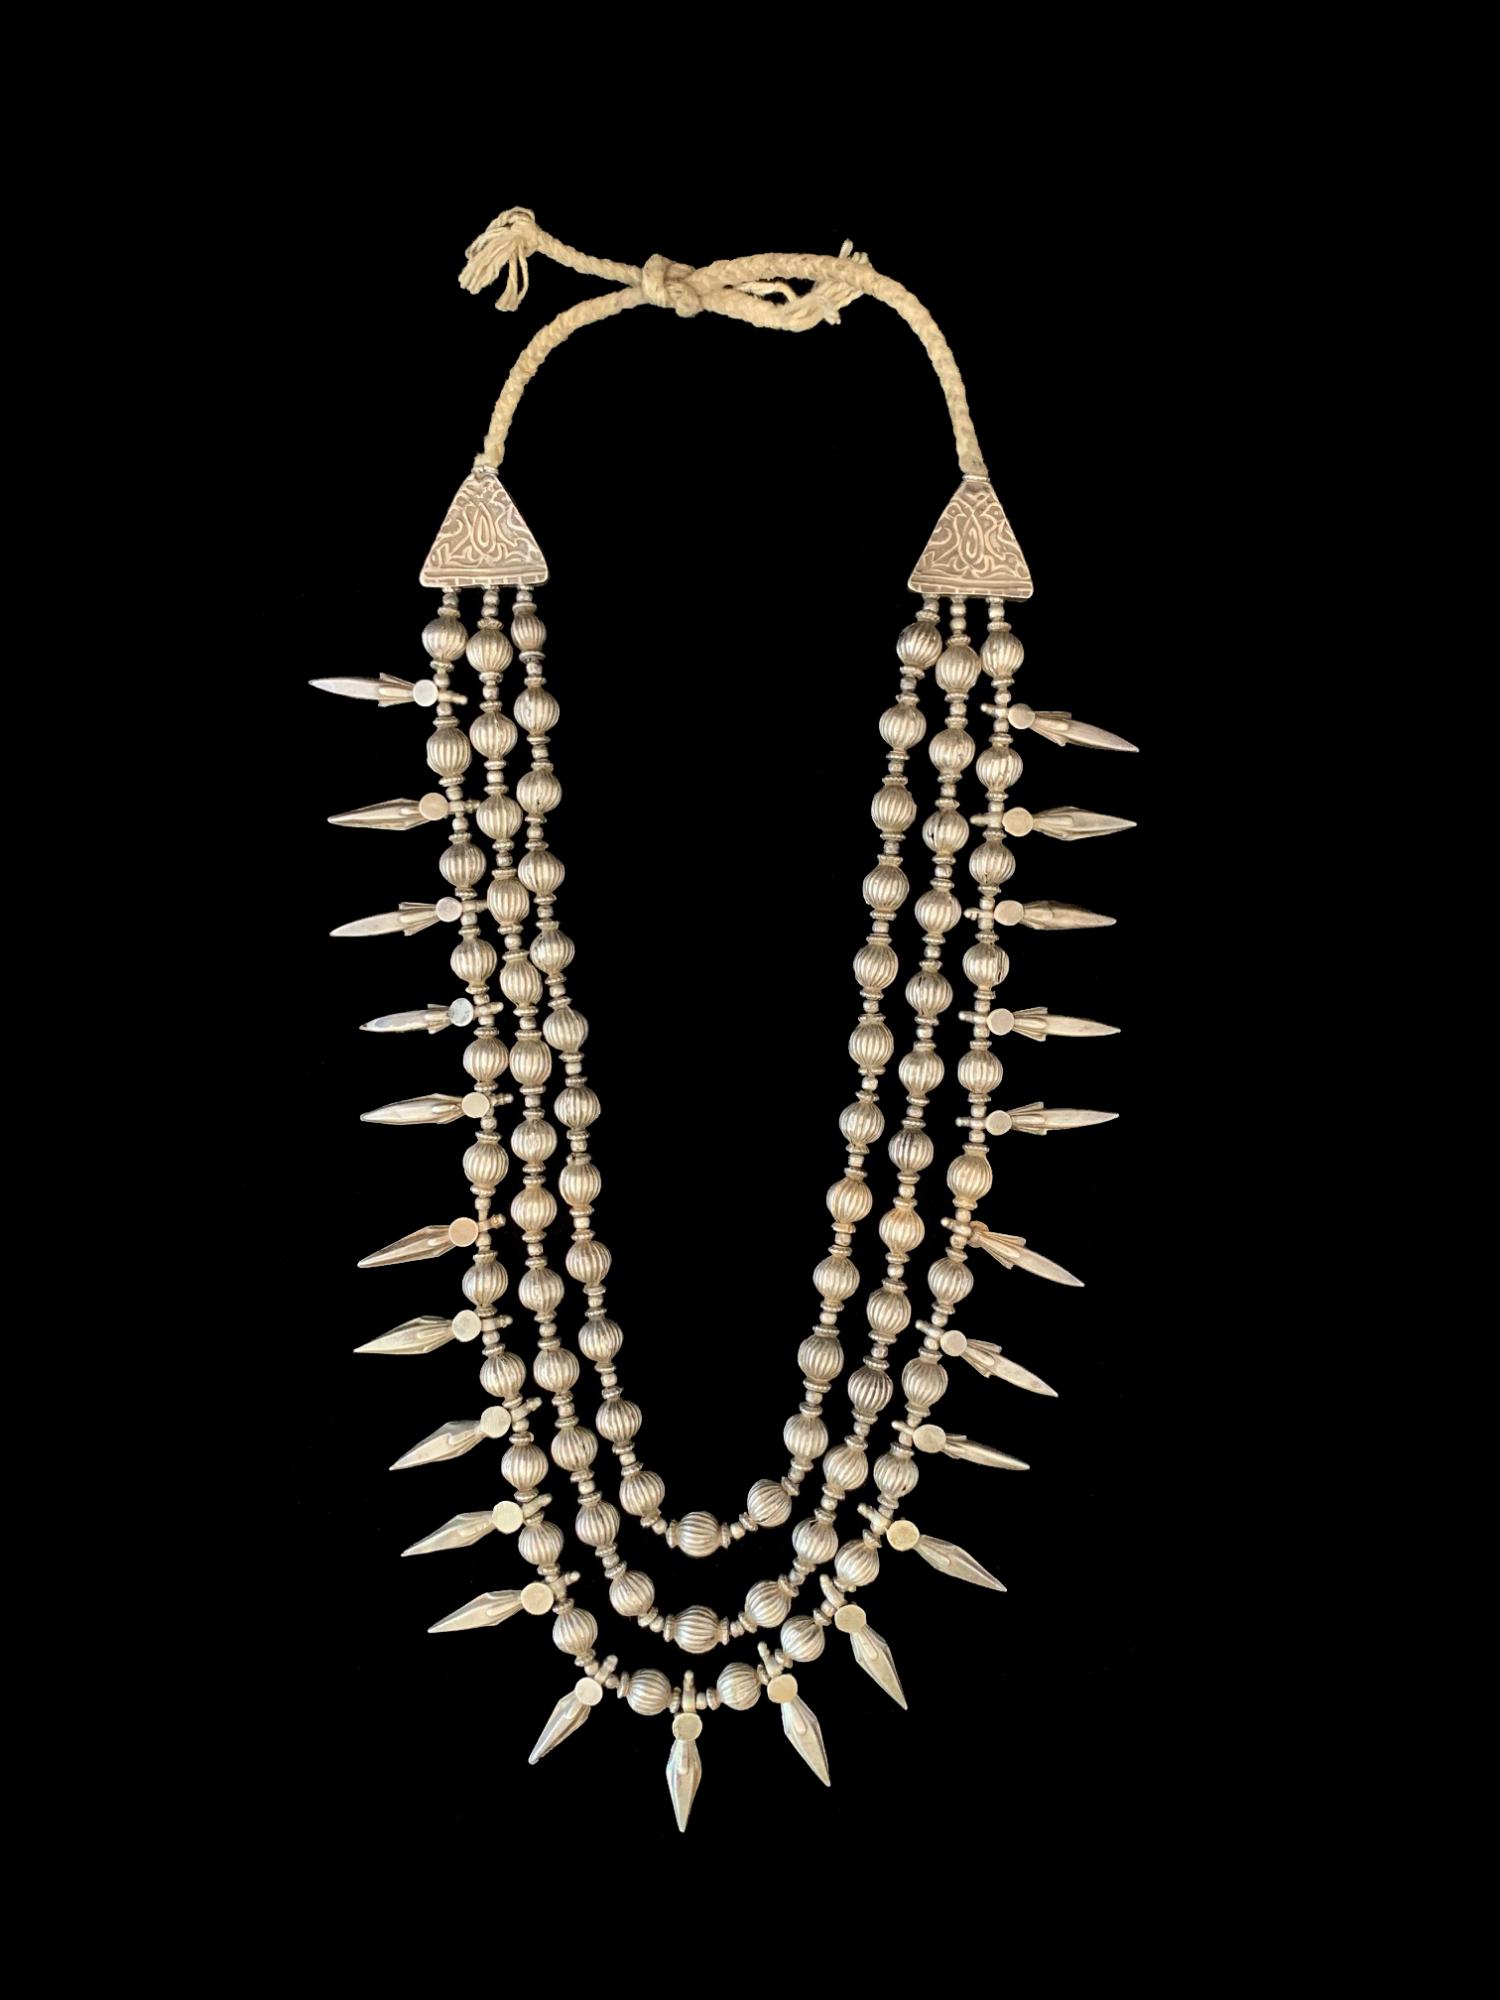 Tribal Silver Necklace from northern India